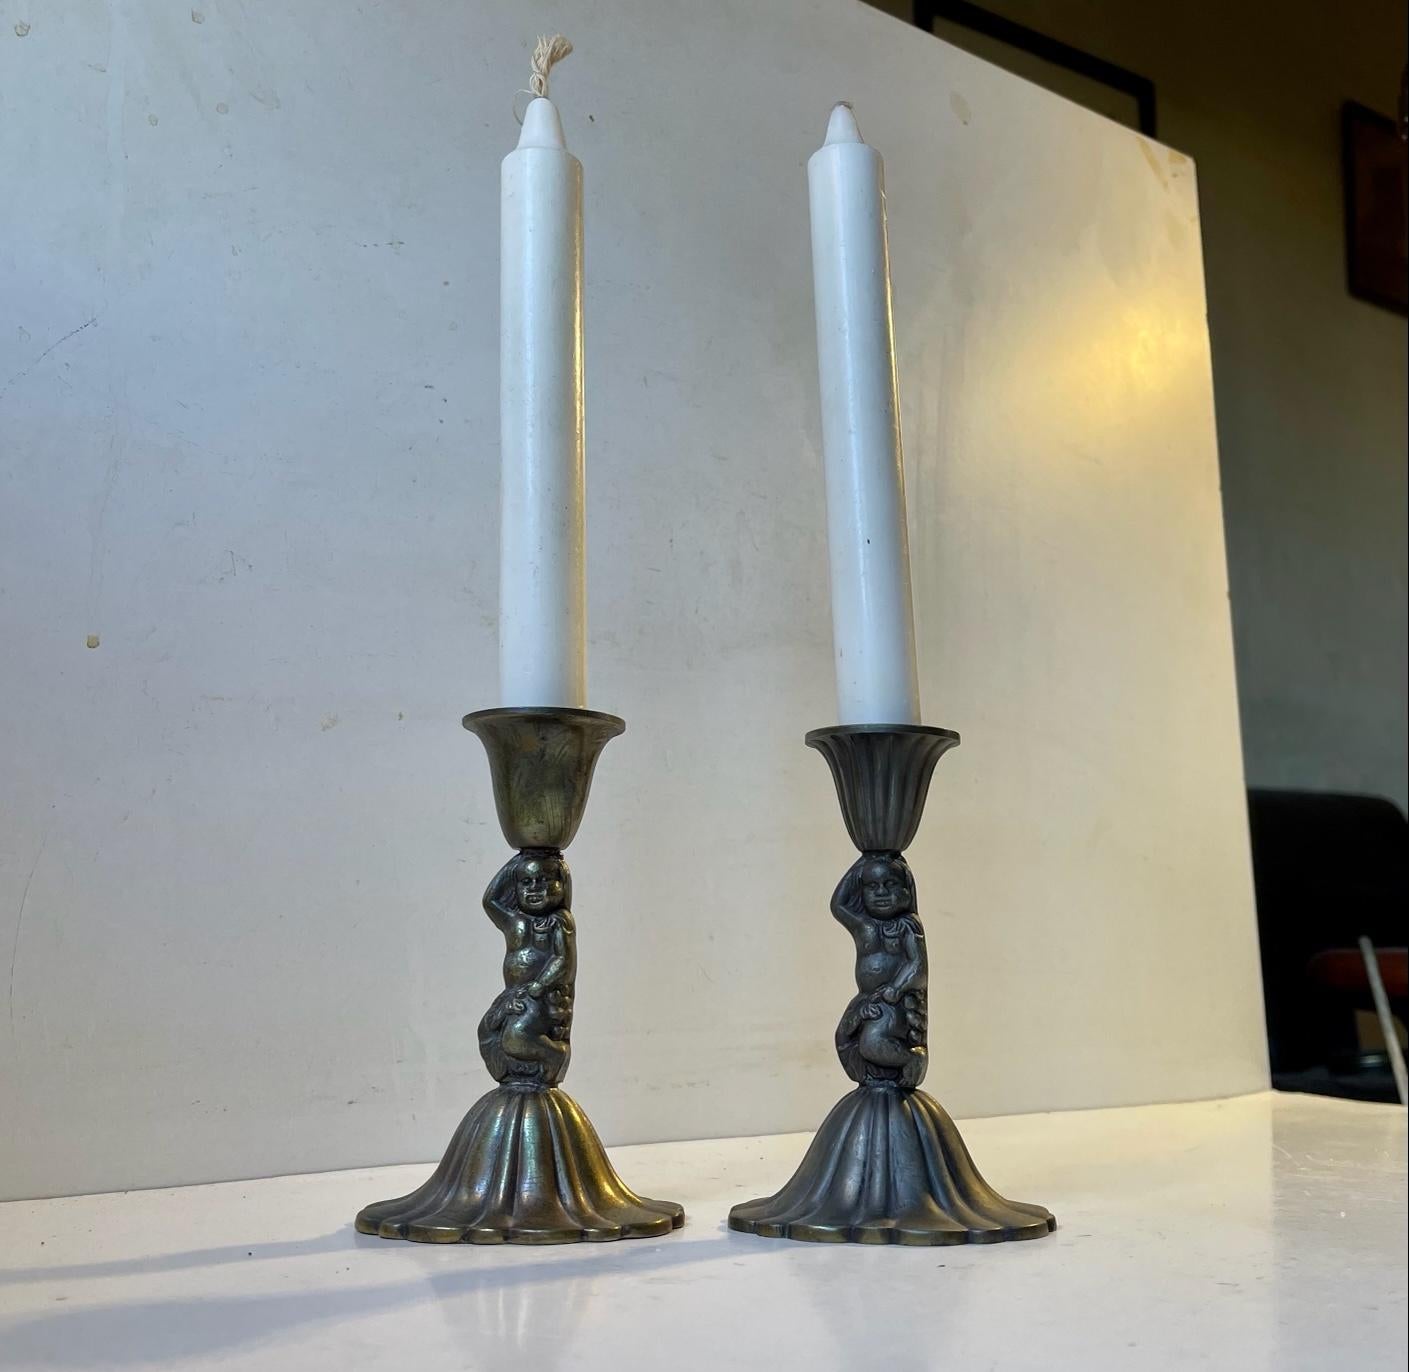 A pair of metal-alloy candlesticks with cherubs. Each one with diffrent patina. Manufactured in Italy during the late 1940s. This set uses regular sized candles. Measurements: H: 13 cm, W: 8 cm (base).